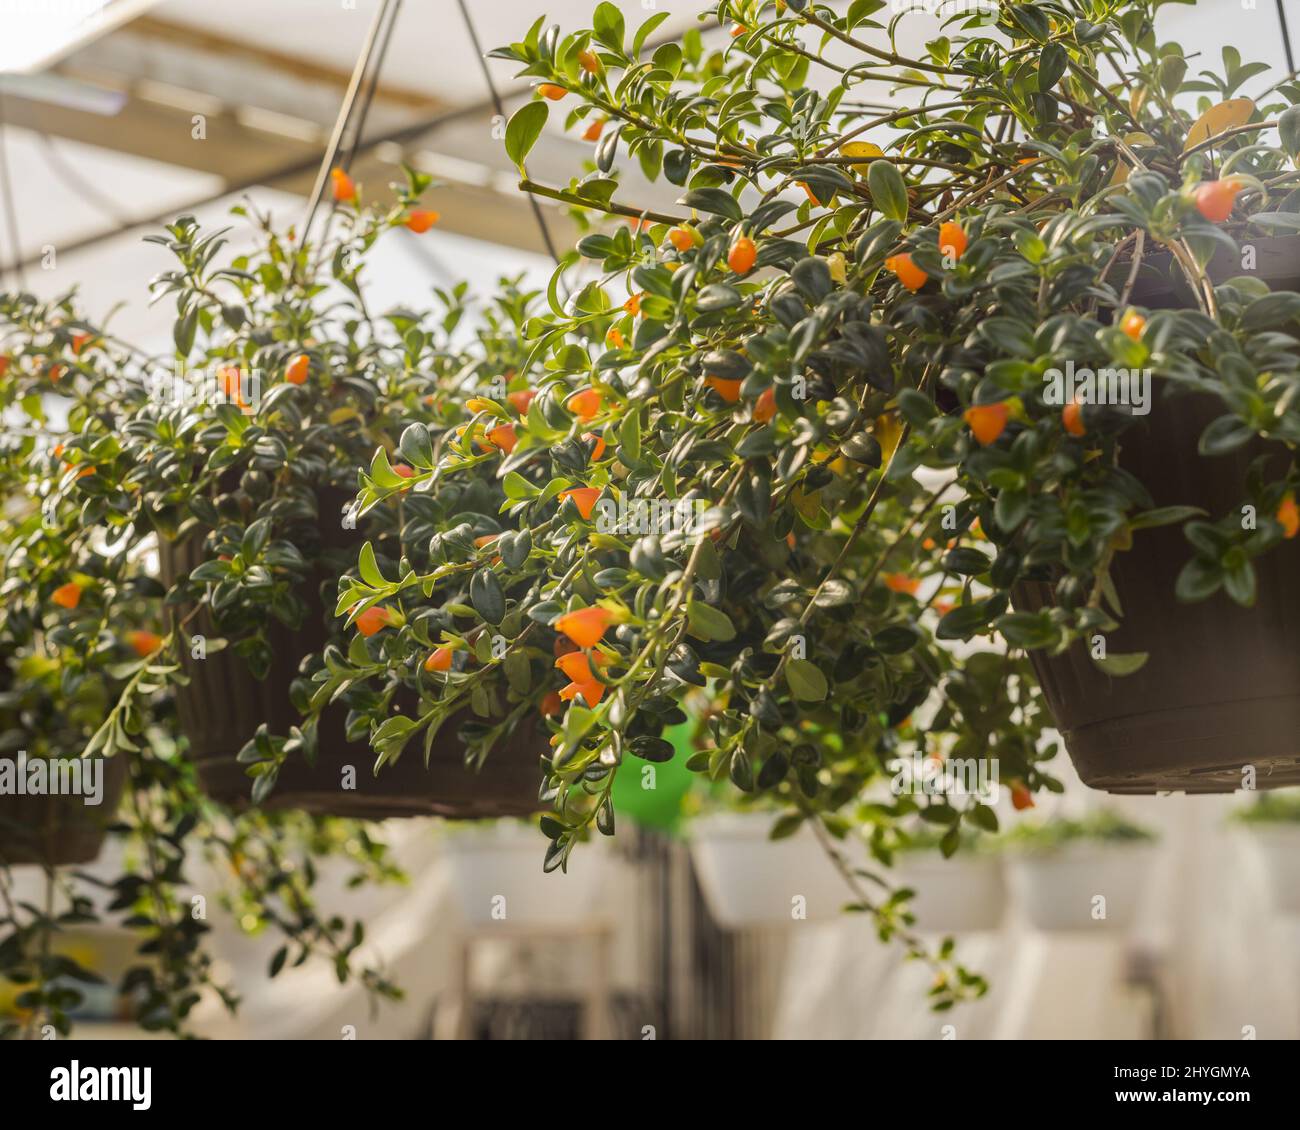 Natural view of goldfish plant hanging on the pots Stock Photo